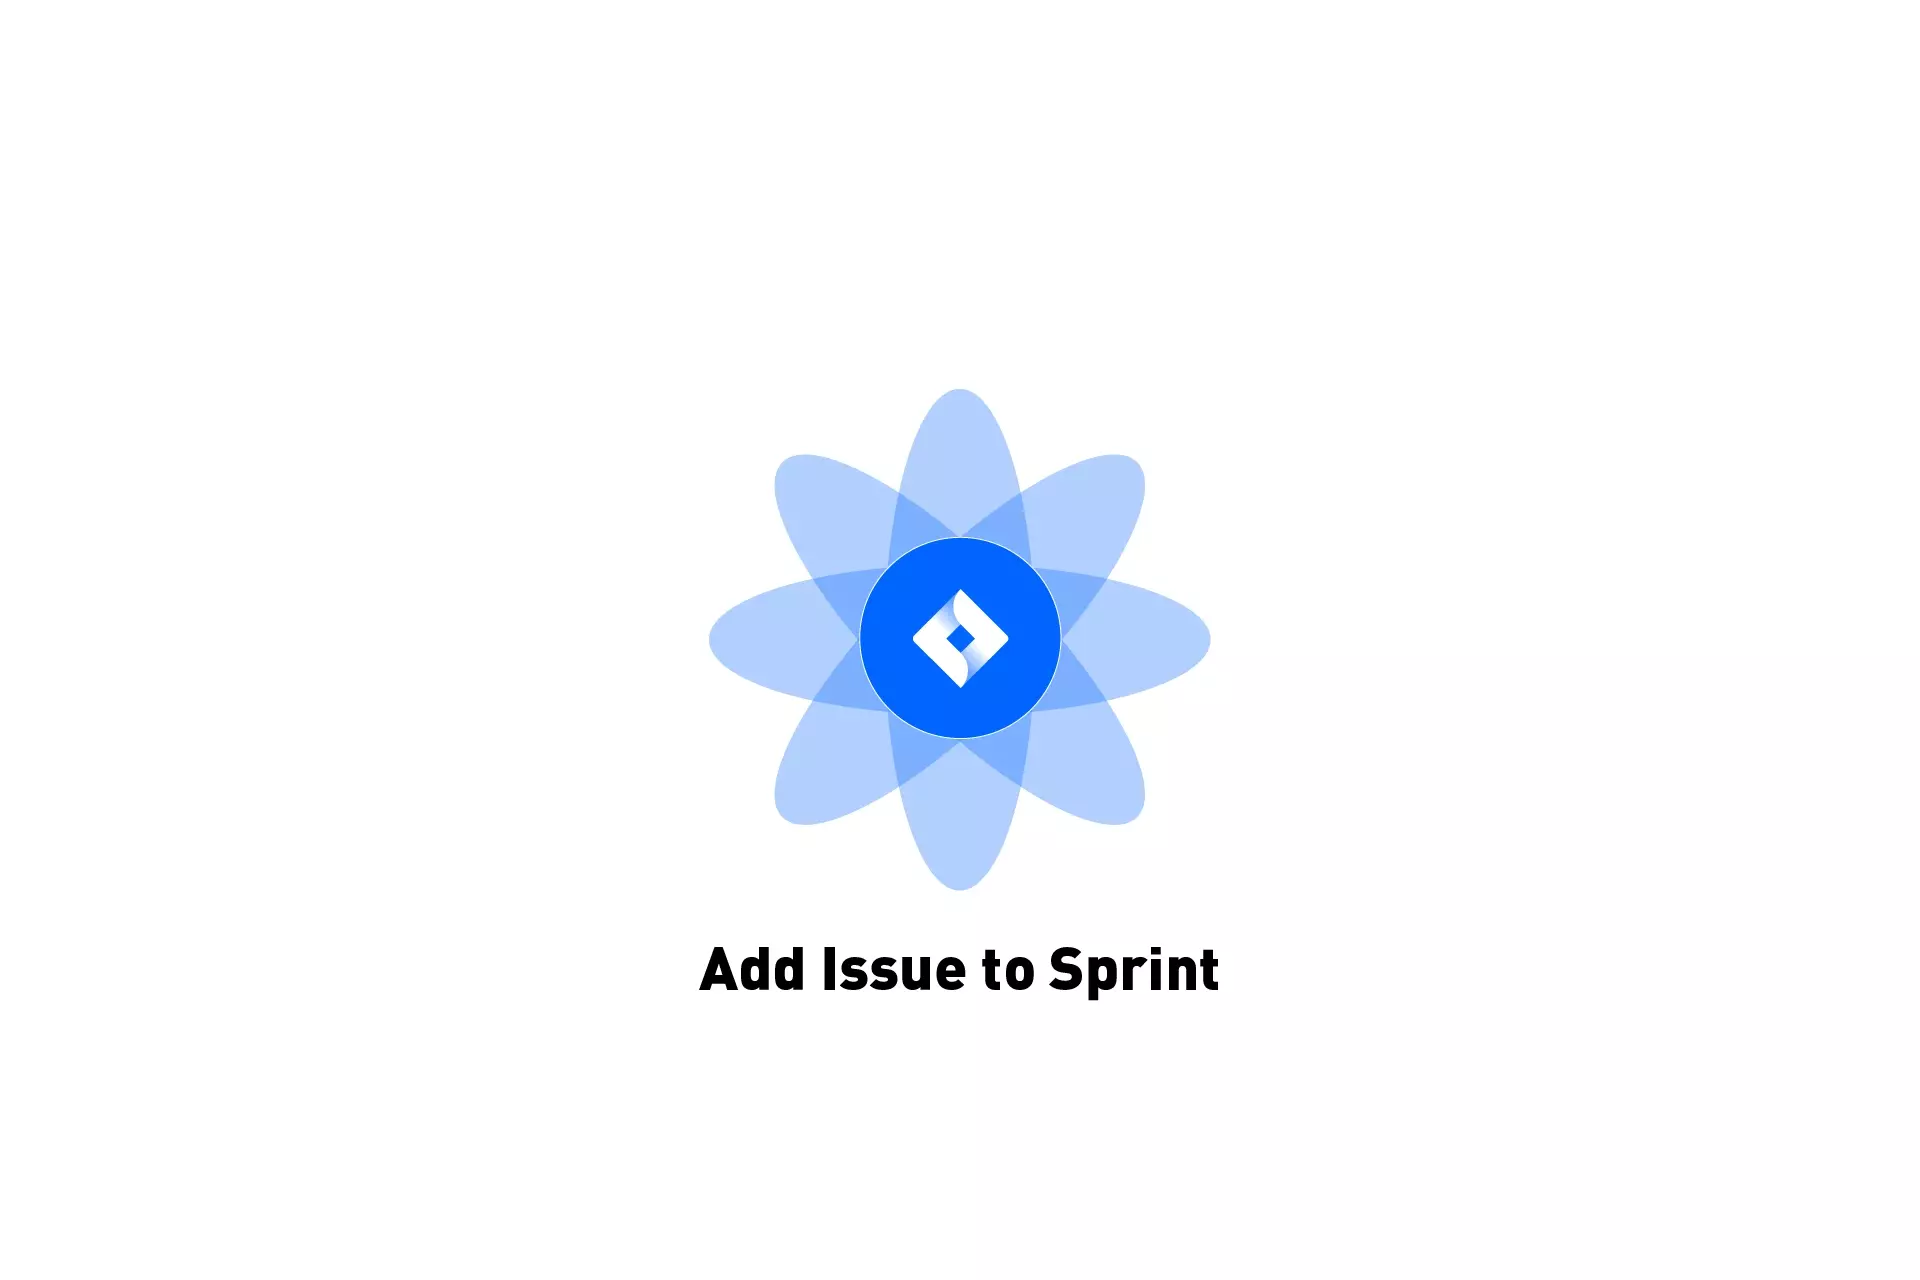 A flower that represents JIRA with the text "Add Issues to Sprint" beneath it.